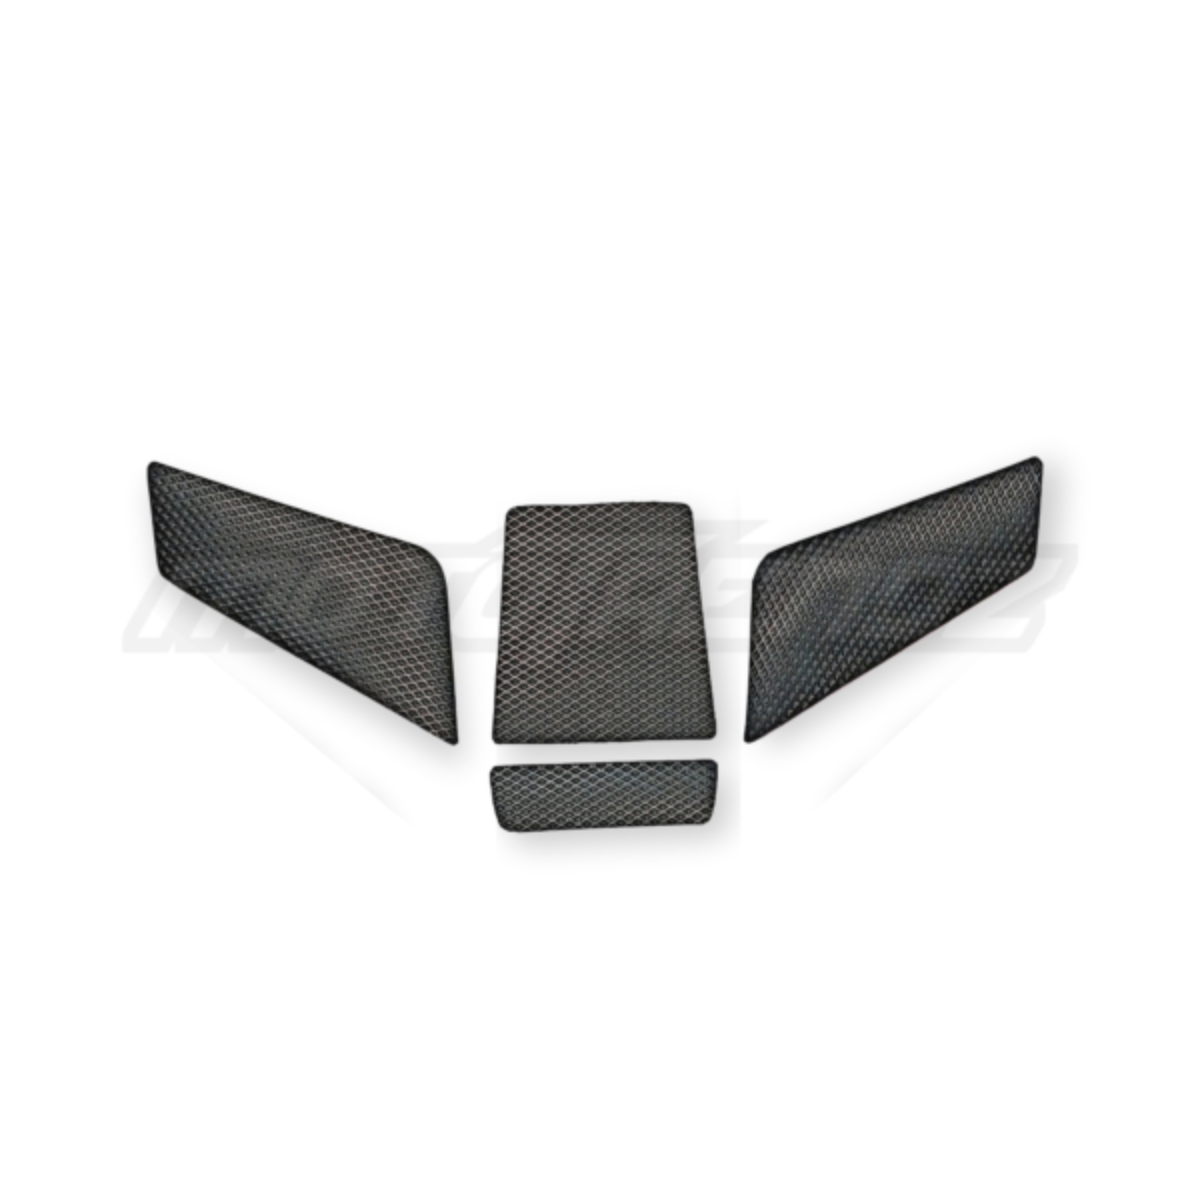 Traction Pads for KTM Adventure 250/390 4